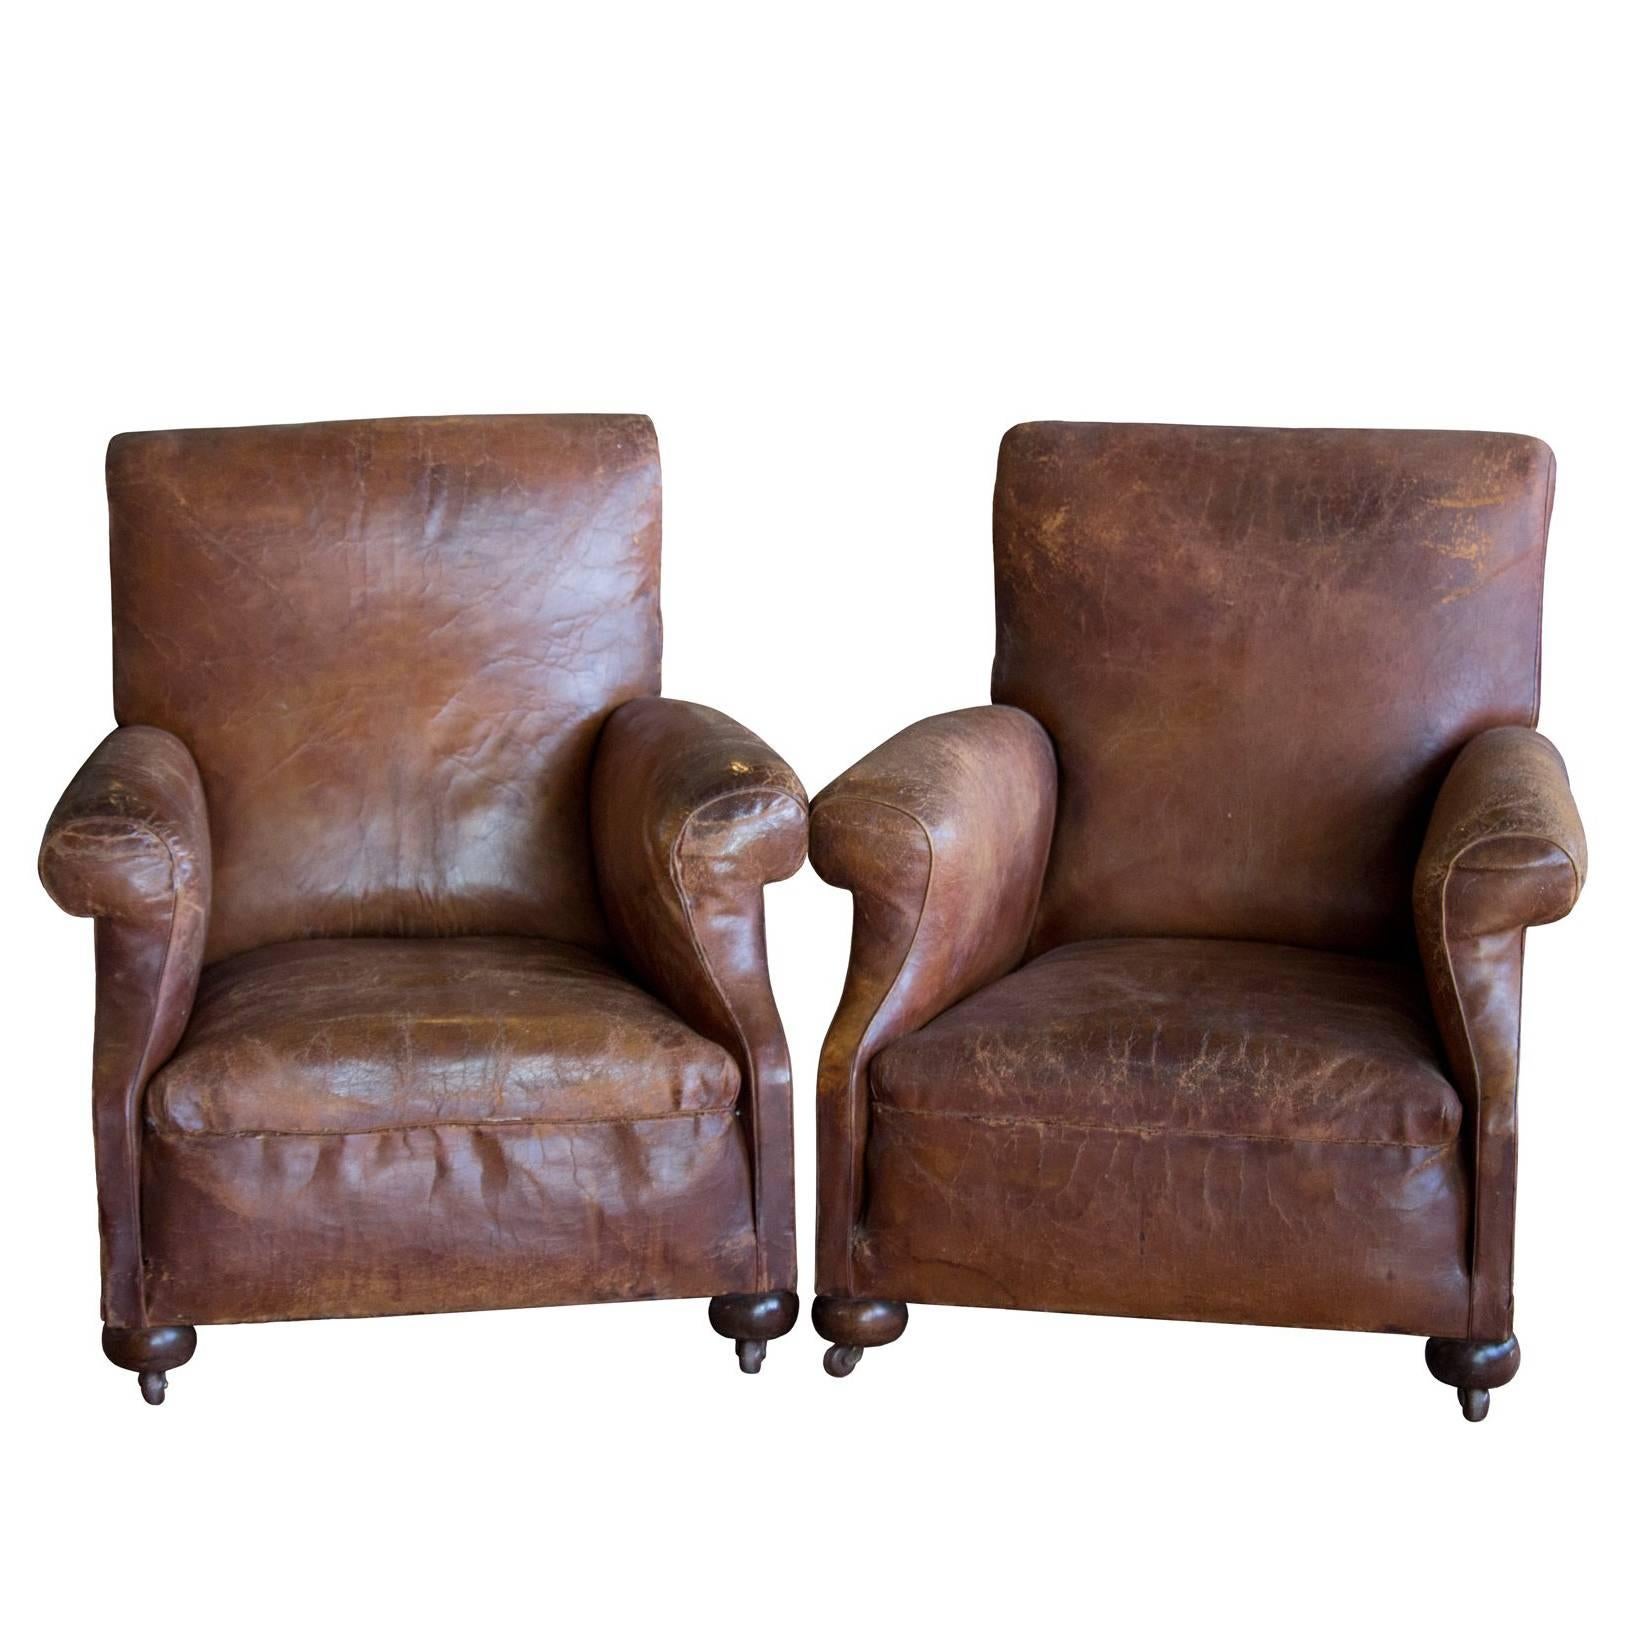 Pair of English Vintage Leather Chairs